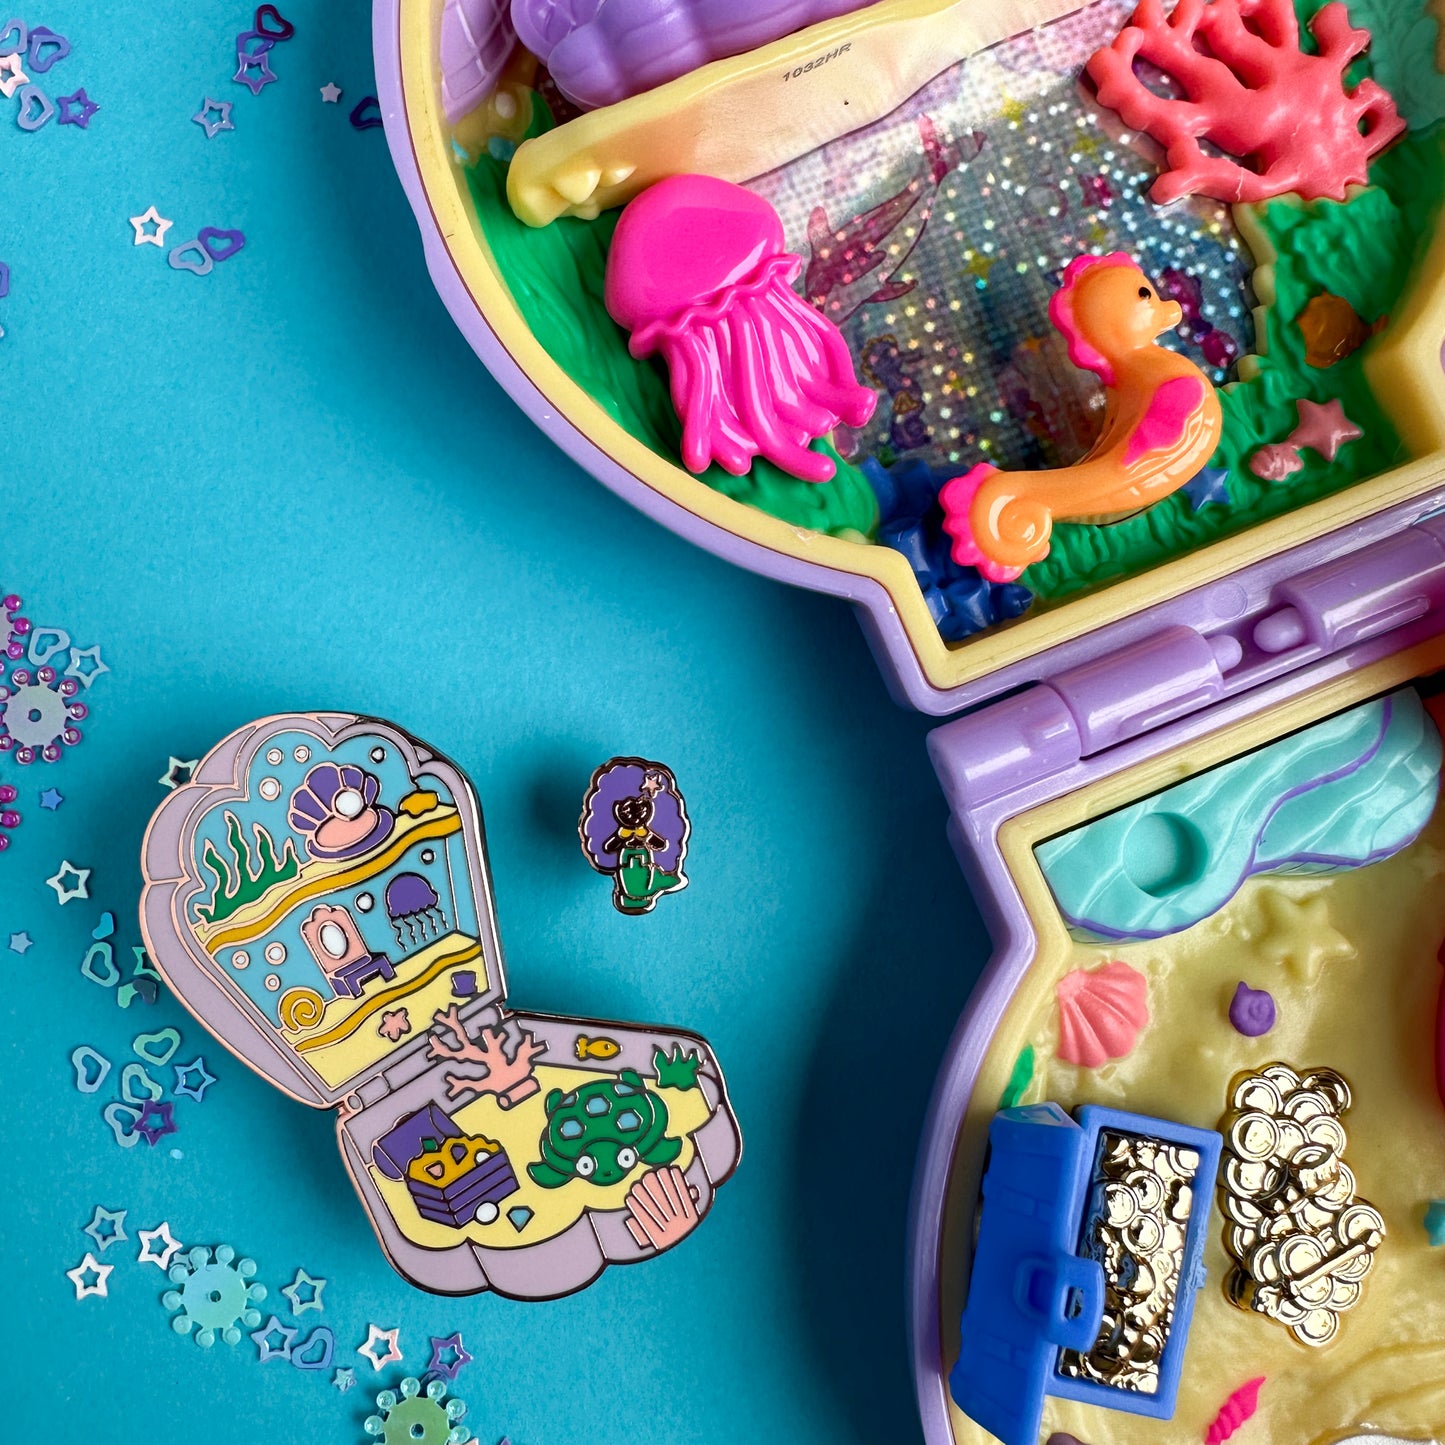 The mermaid pocket pin set is sitting next to a real Polly Pocket mermaid toy 